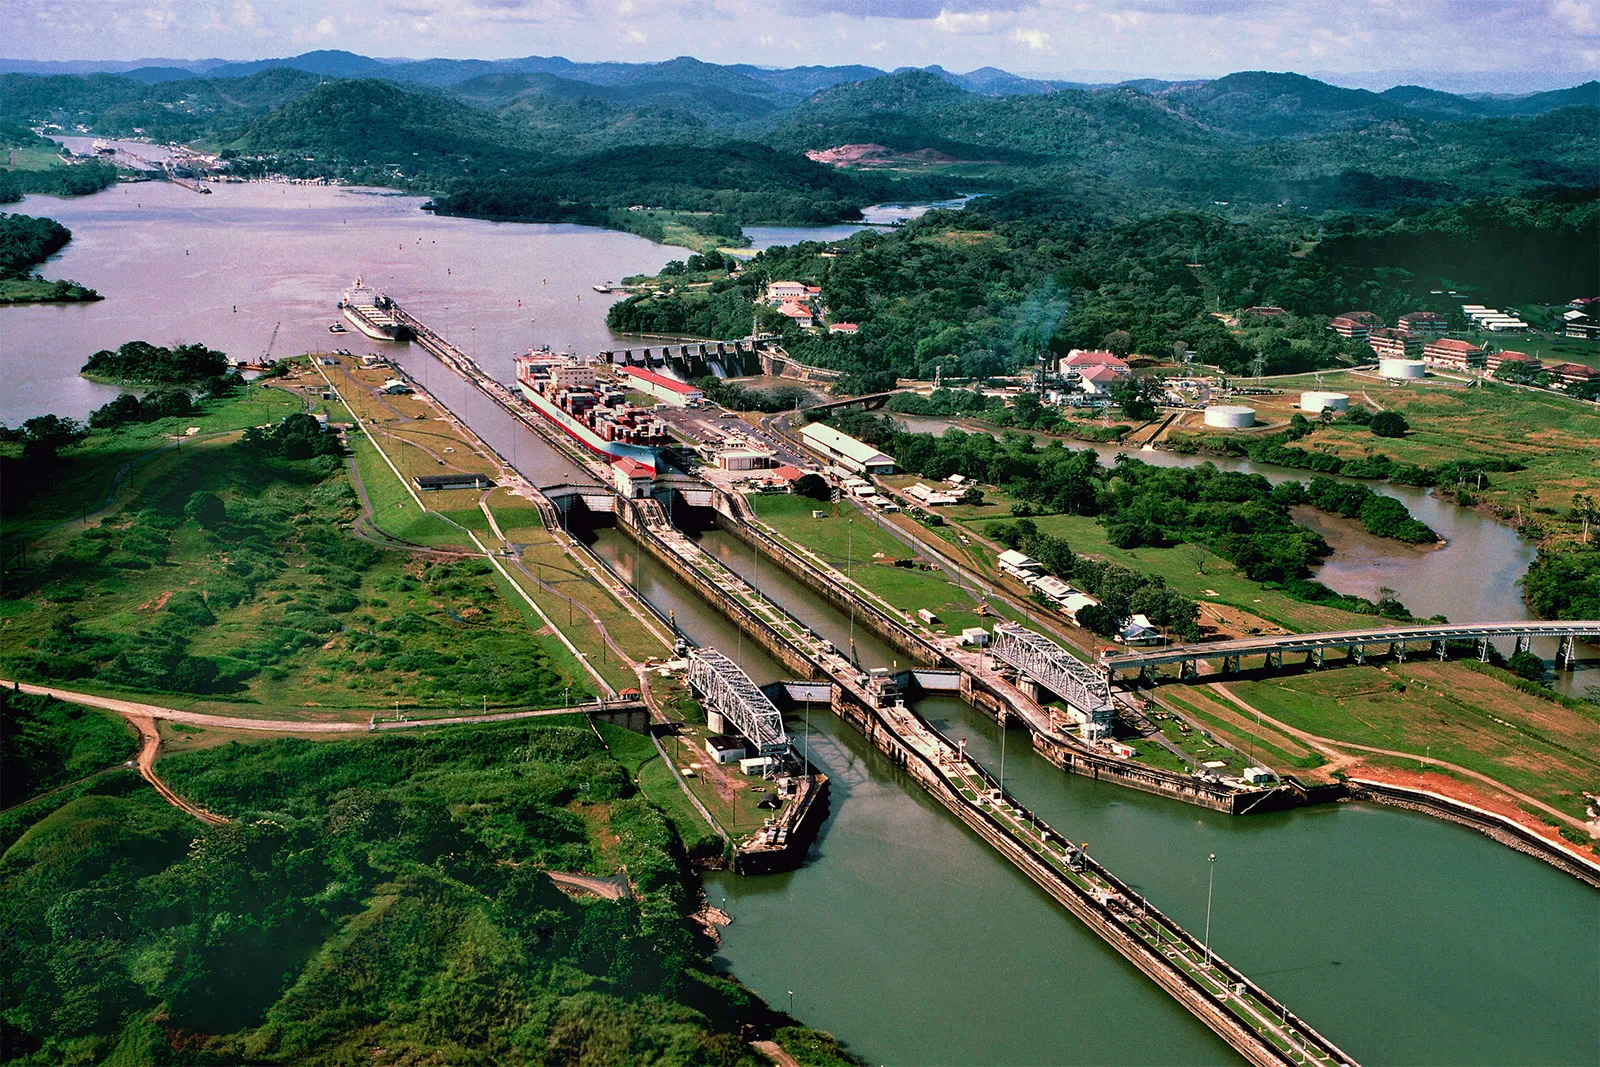 eBlue_economy_August 24th - Panama Canal waiting time for non booked vessels (Days)